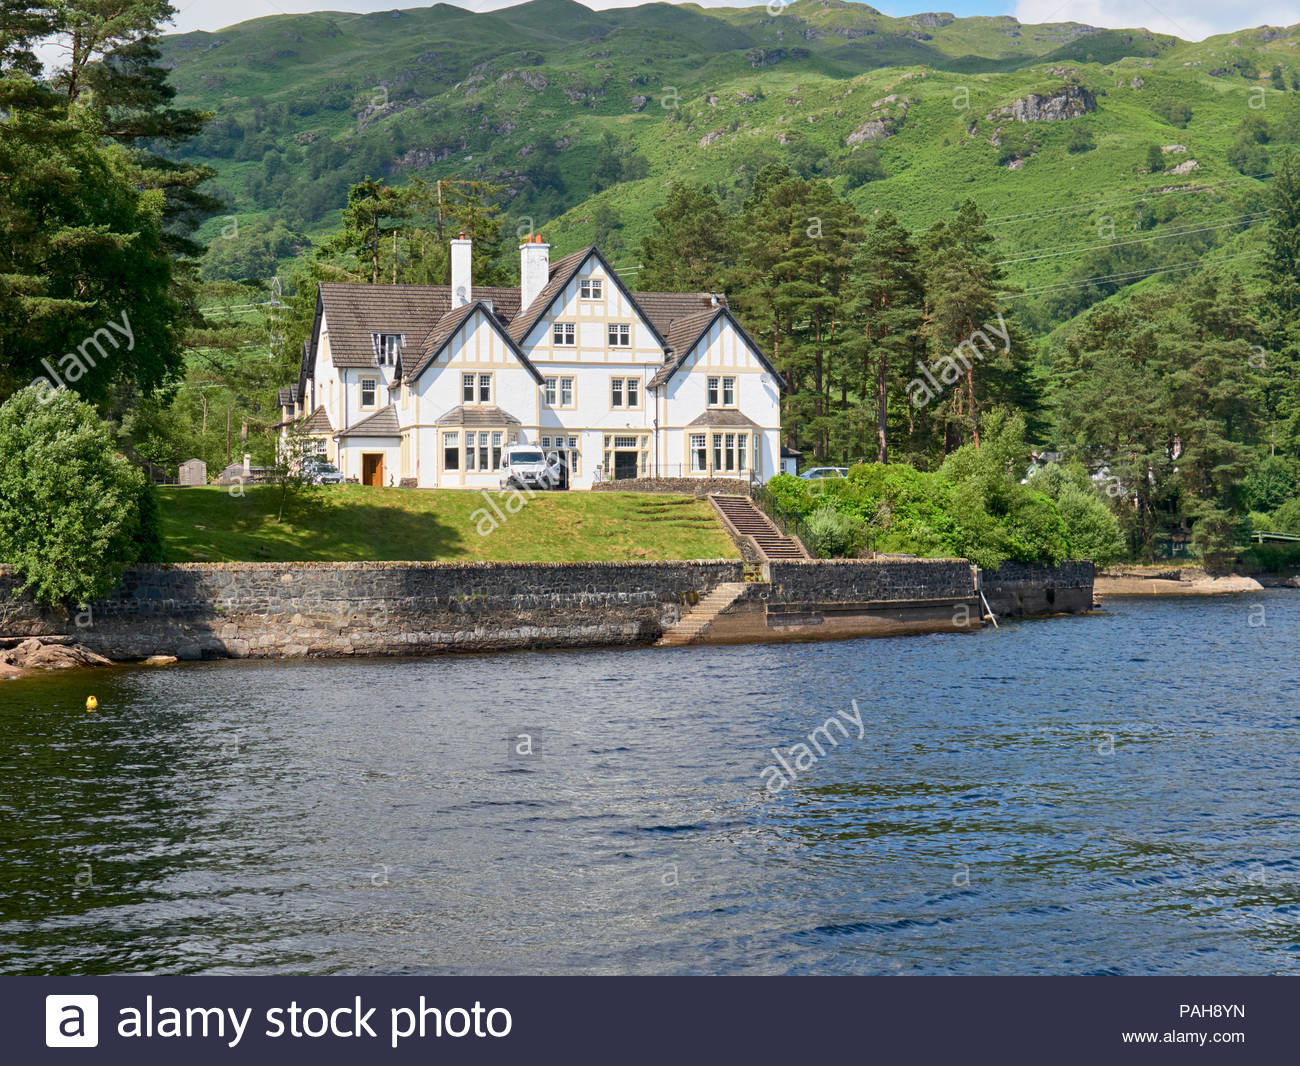 Lochside House And Apartments In Stronachlachar On Loch Katrine In The Loch Lomond And Trossachs National Park In Scotland Uk Stock Photo Alamy